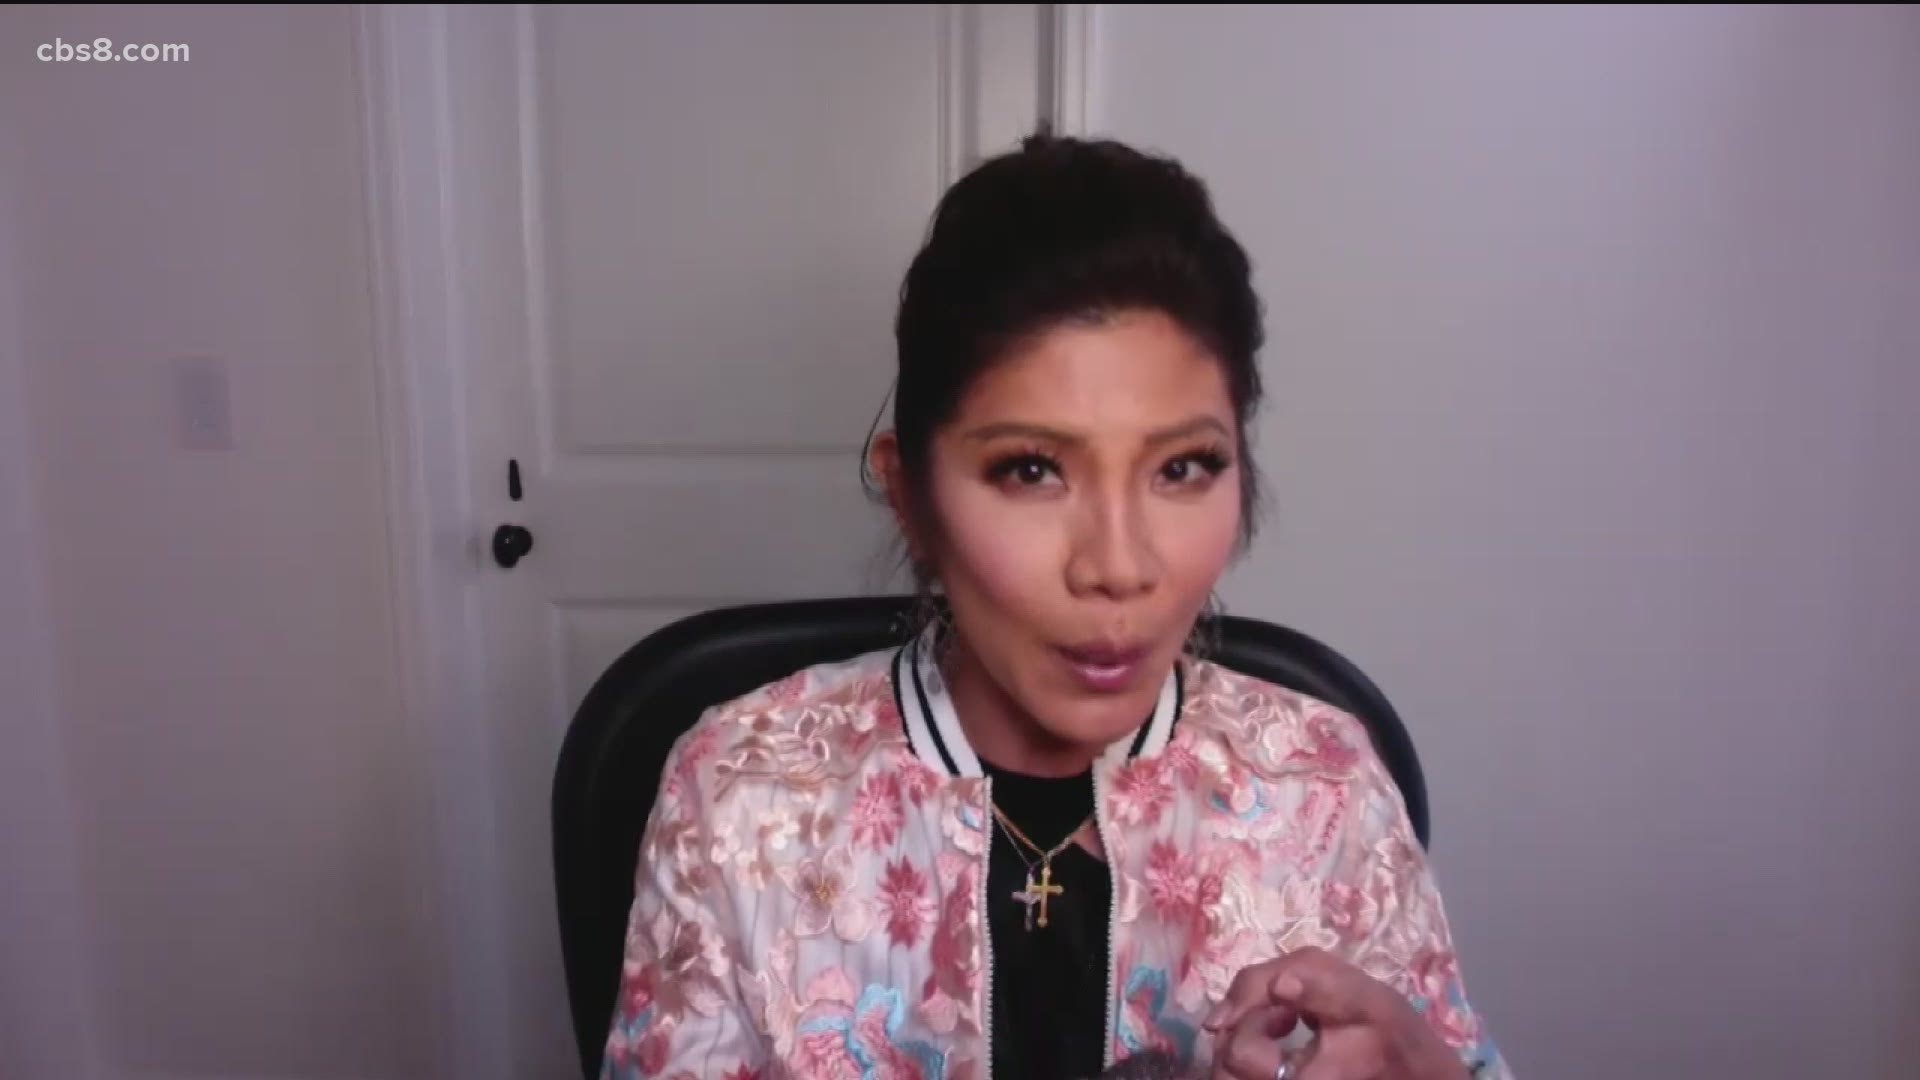 Even Julie Chen isn't sure which contestants will be allowed to participate due to COVID-19 screening.